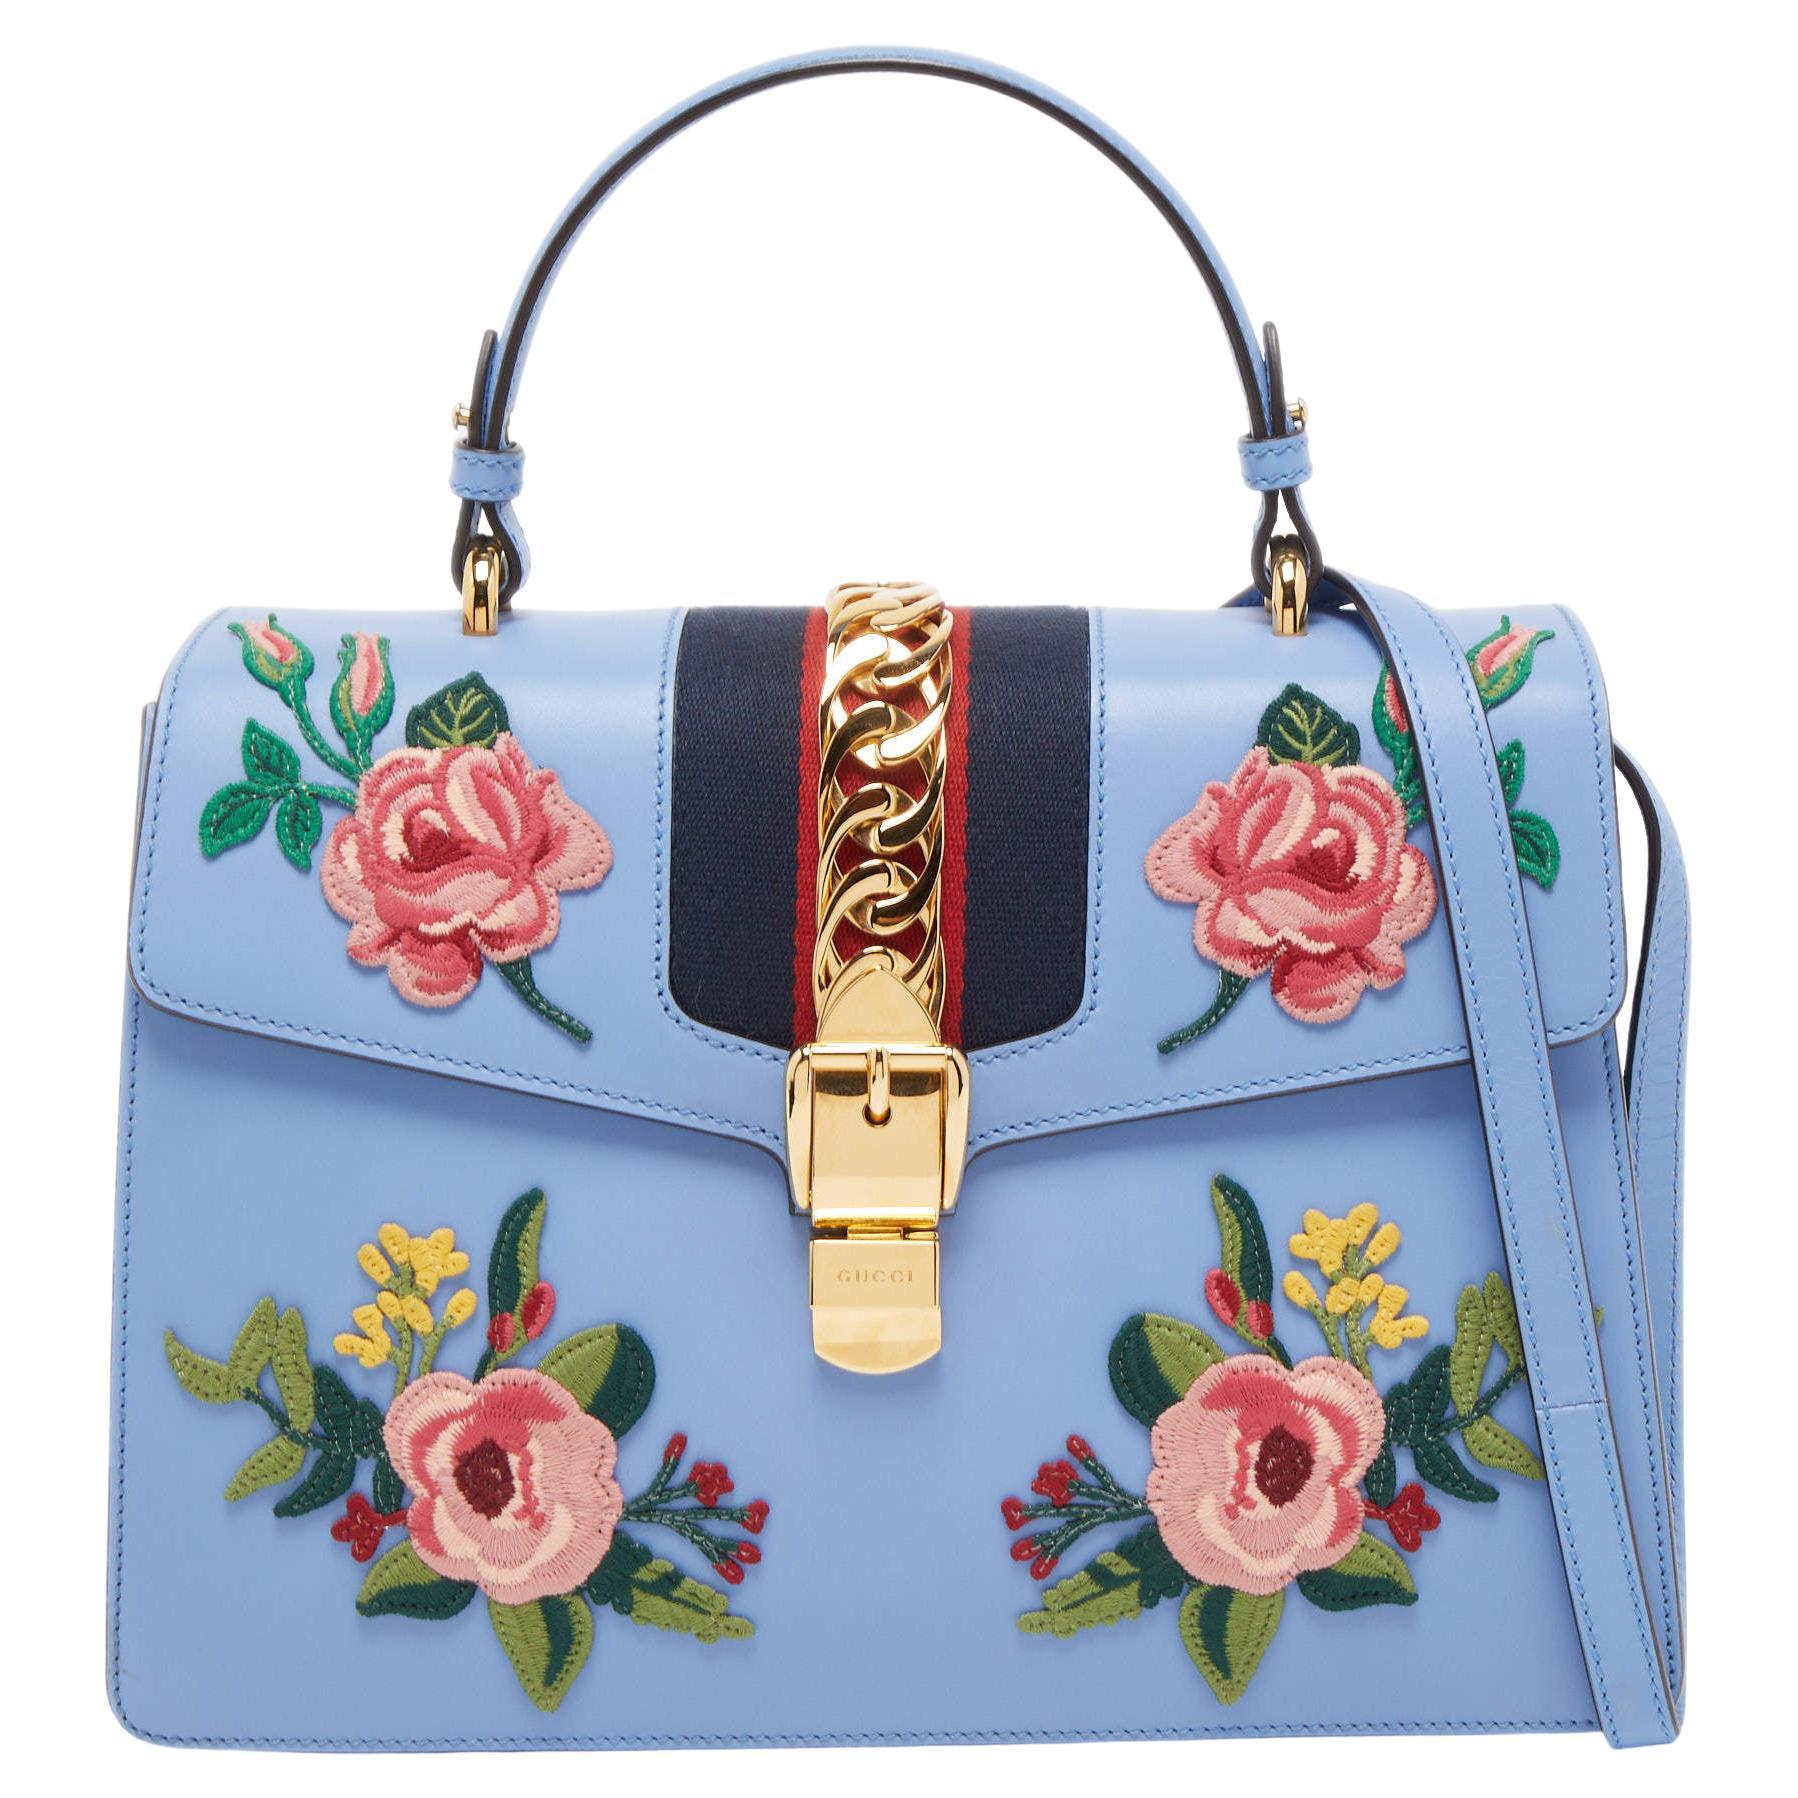 Gucci Light Blue Floral Embroidered Leather Medium Sylvie Top Handle Bag